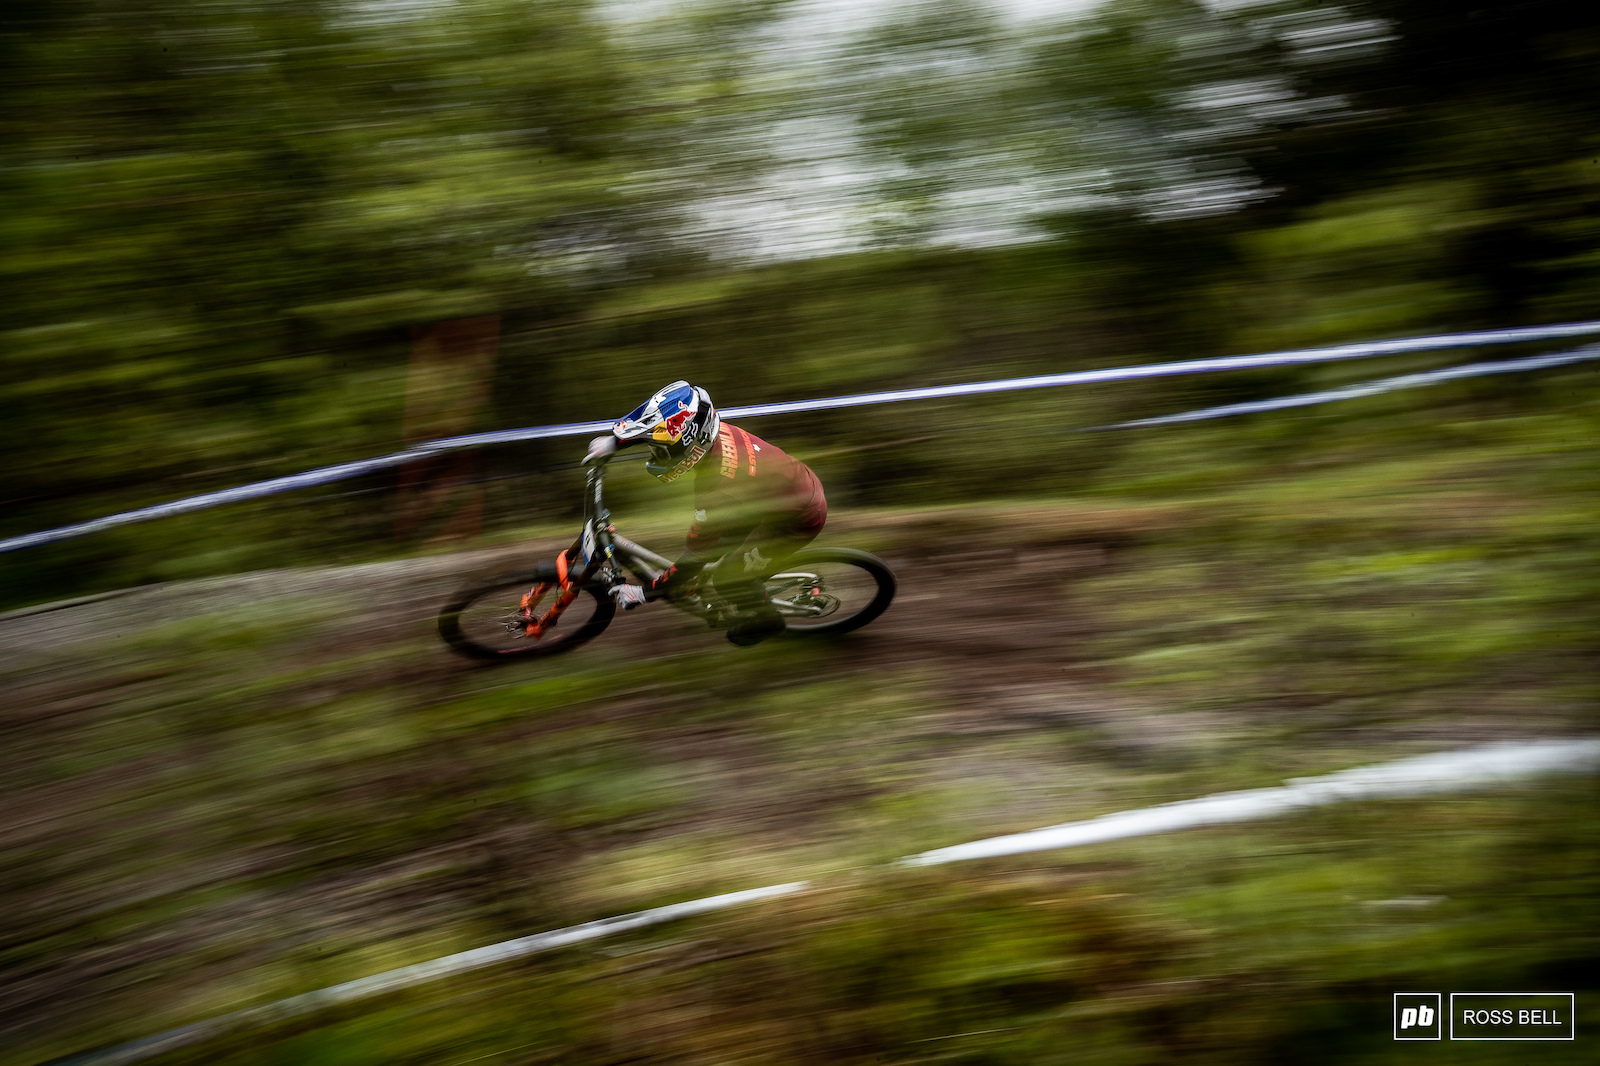 Laurie Greenland is one of a whole host of UK racers dreaming of the top step of the podium in Fort William.